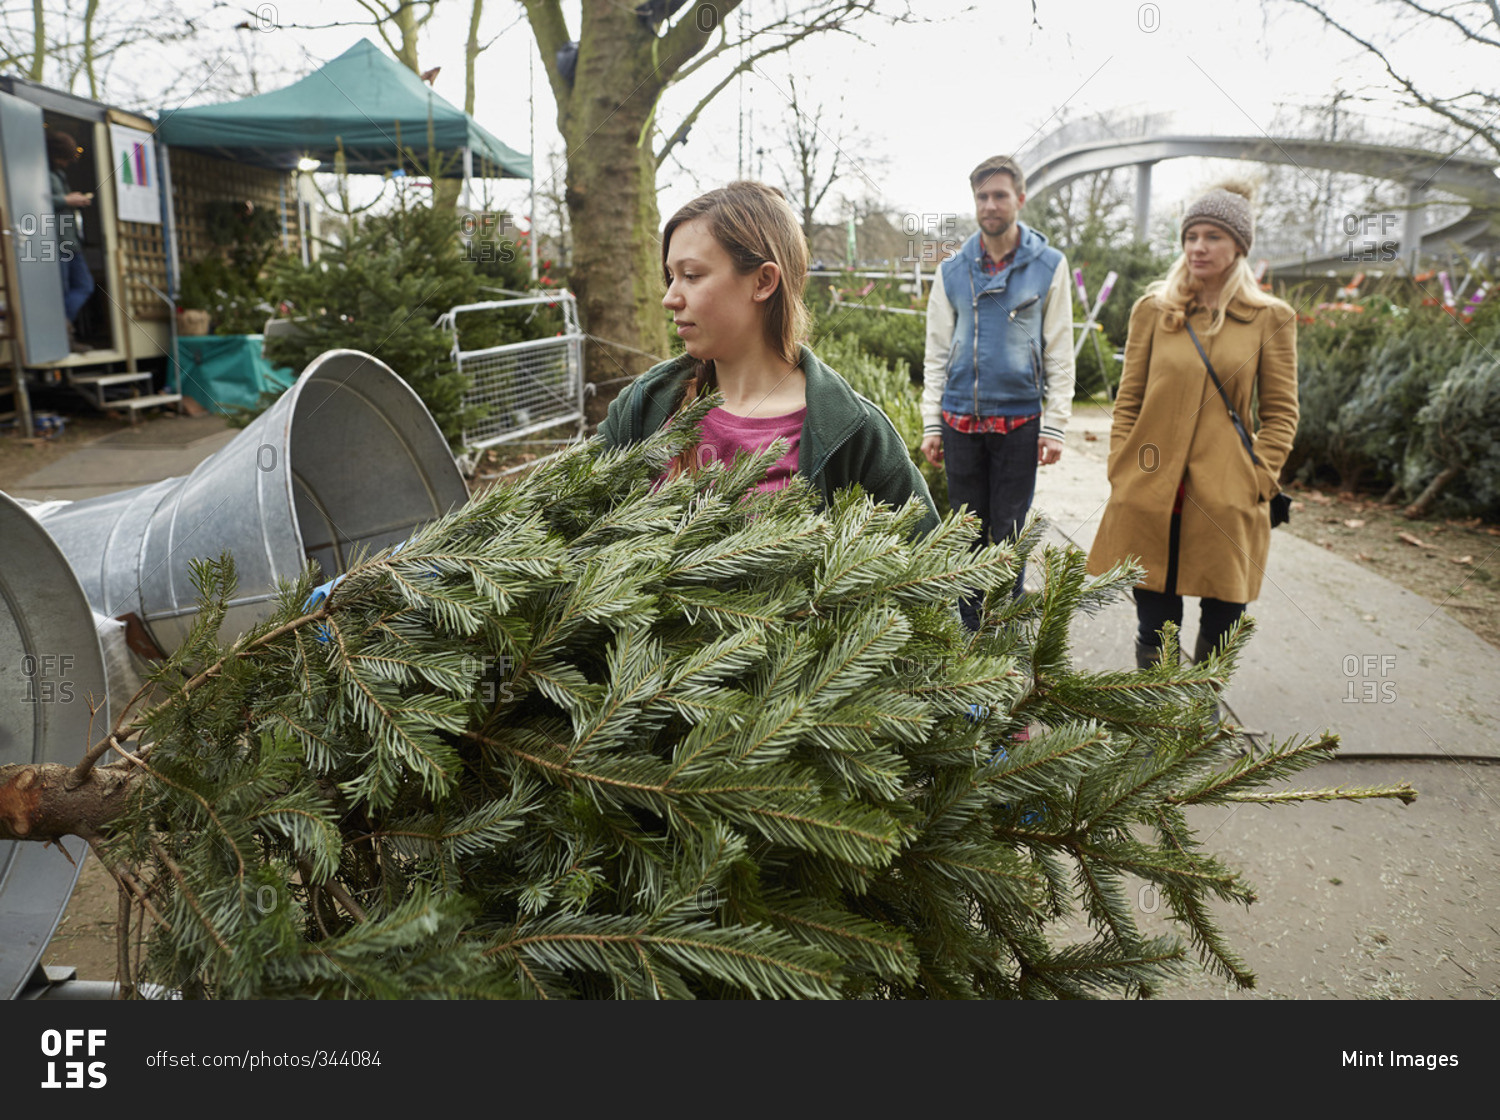 A staff member at a garden center feeding a Christmas tree into the netting machine to wrap it for the client